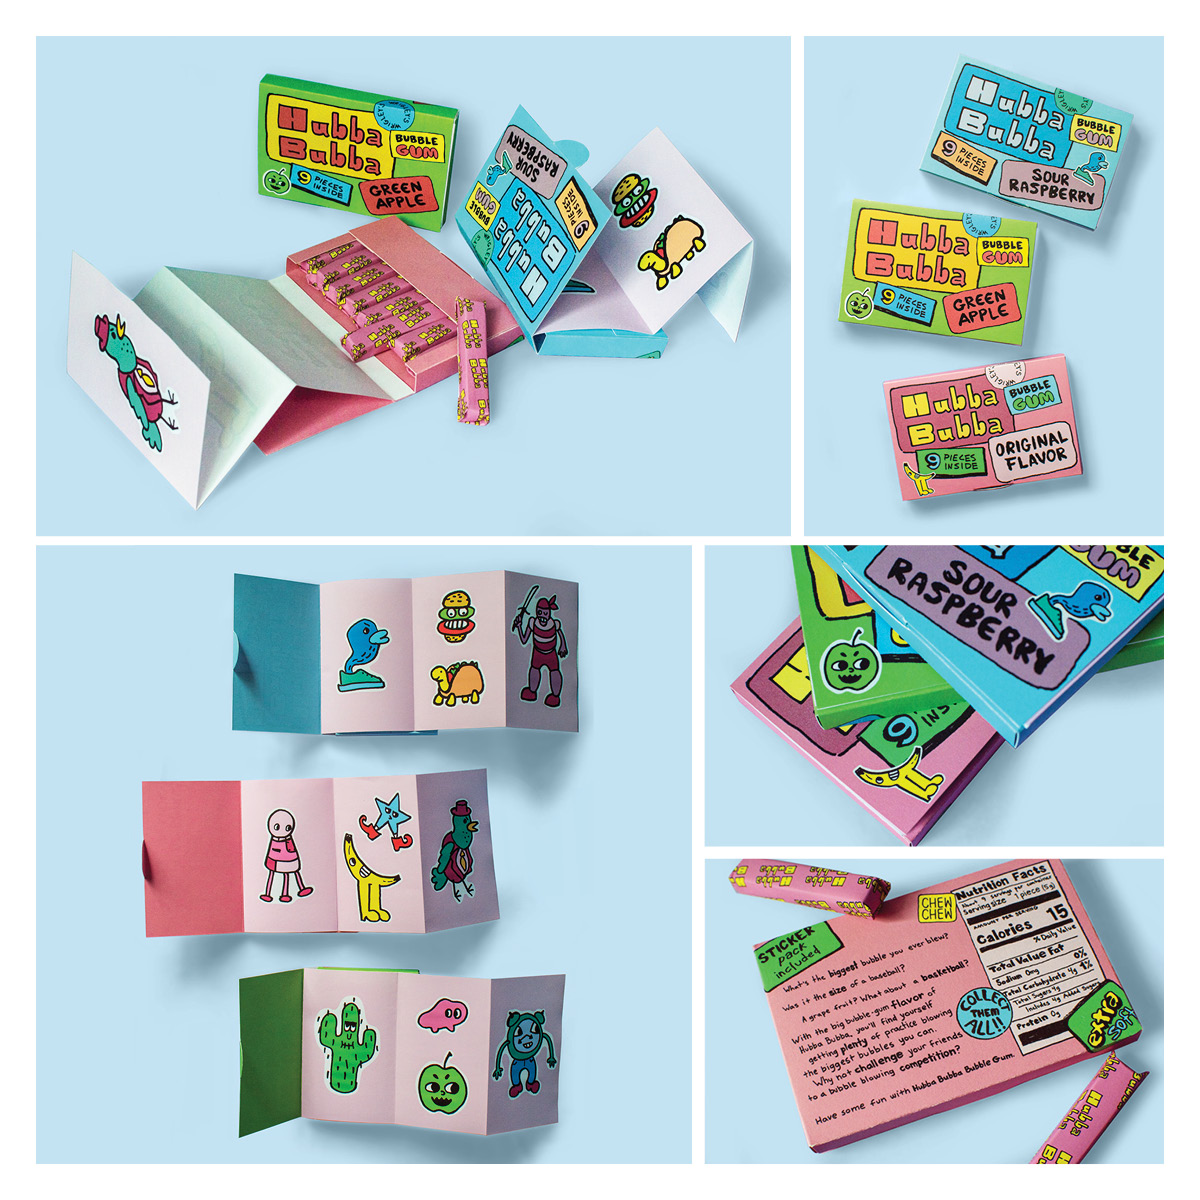 Vision board for Hubba Bubba rebrand showcases gum packs with stickers: teal bird, hamburger, taco shell turtle. Flavors: sour raspberry, green apple, and the original flavor